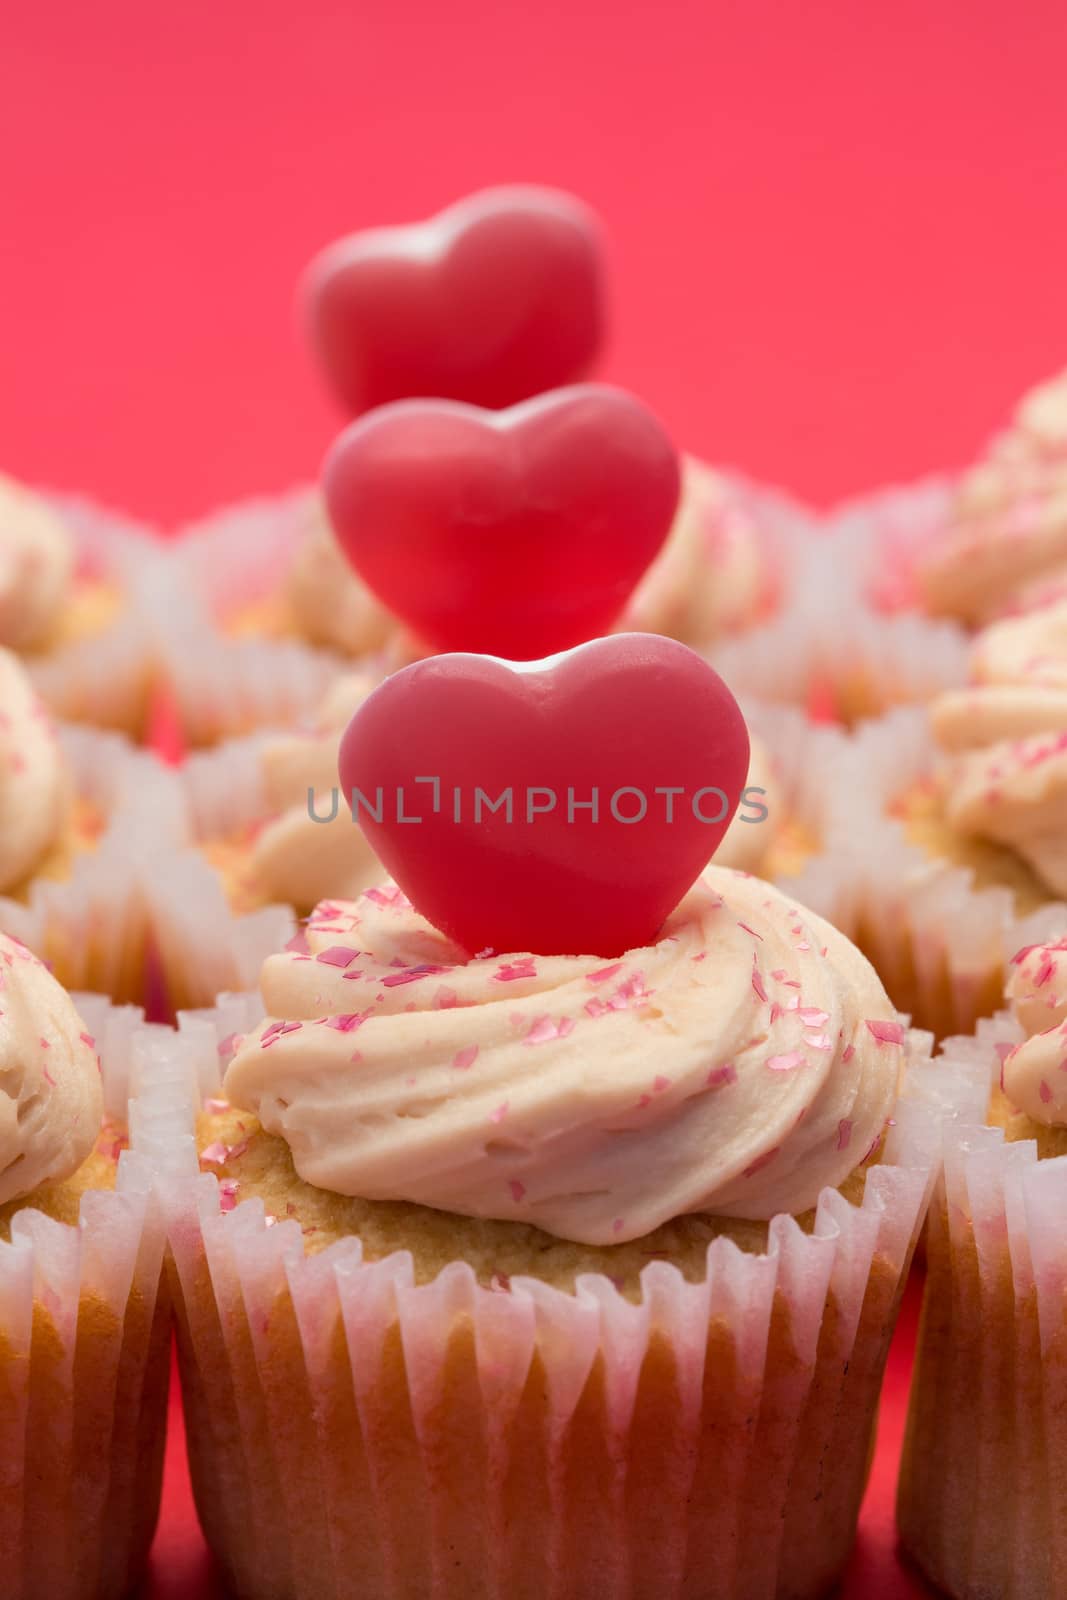 Valentines day pink and white cupcakes by Wavebreakmedia